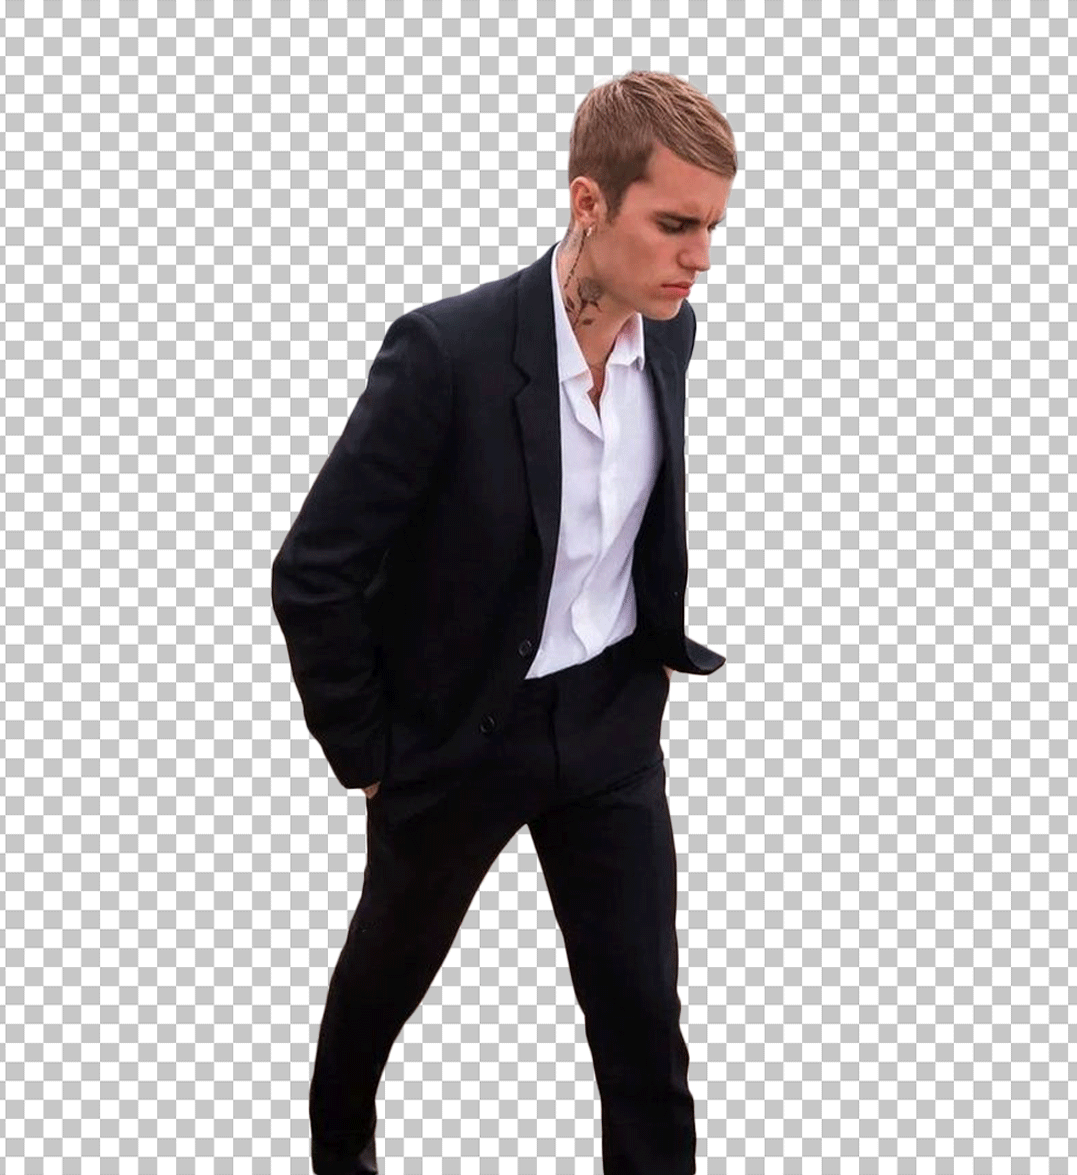 Justin Bieber is walking in a black suit PNG Image